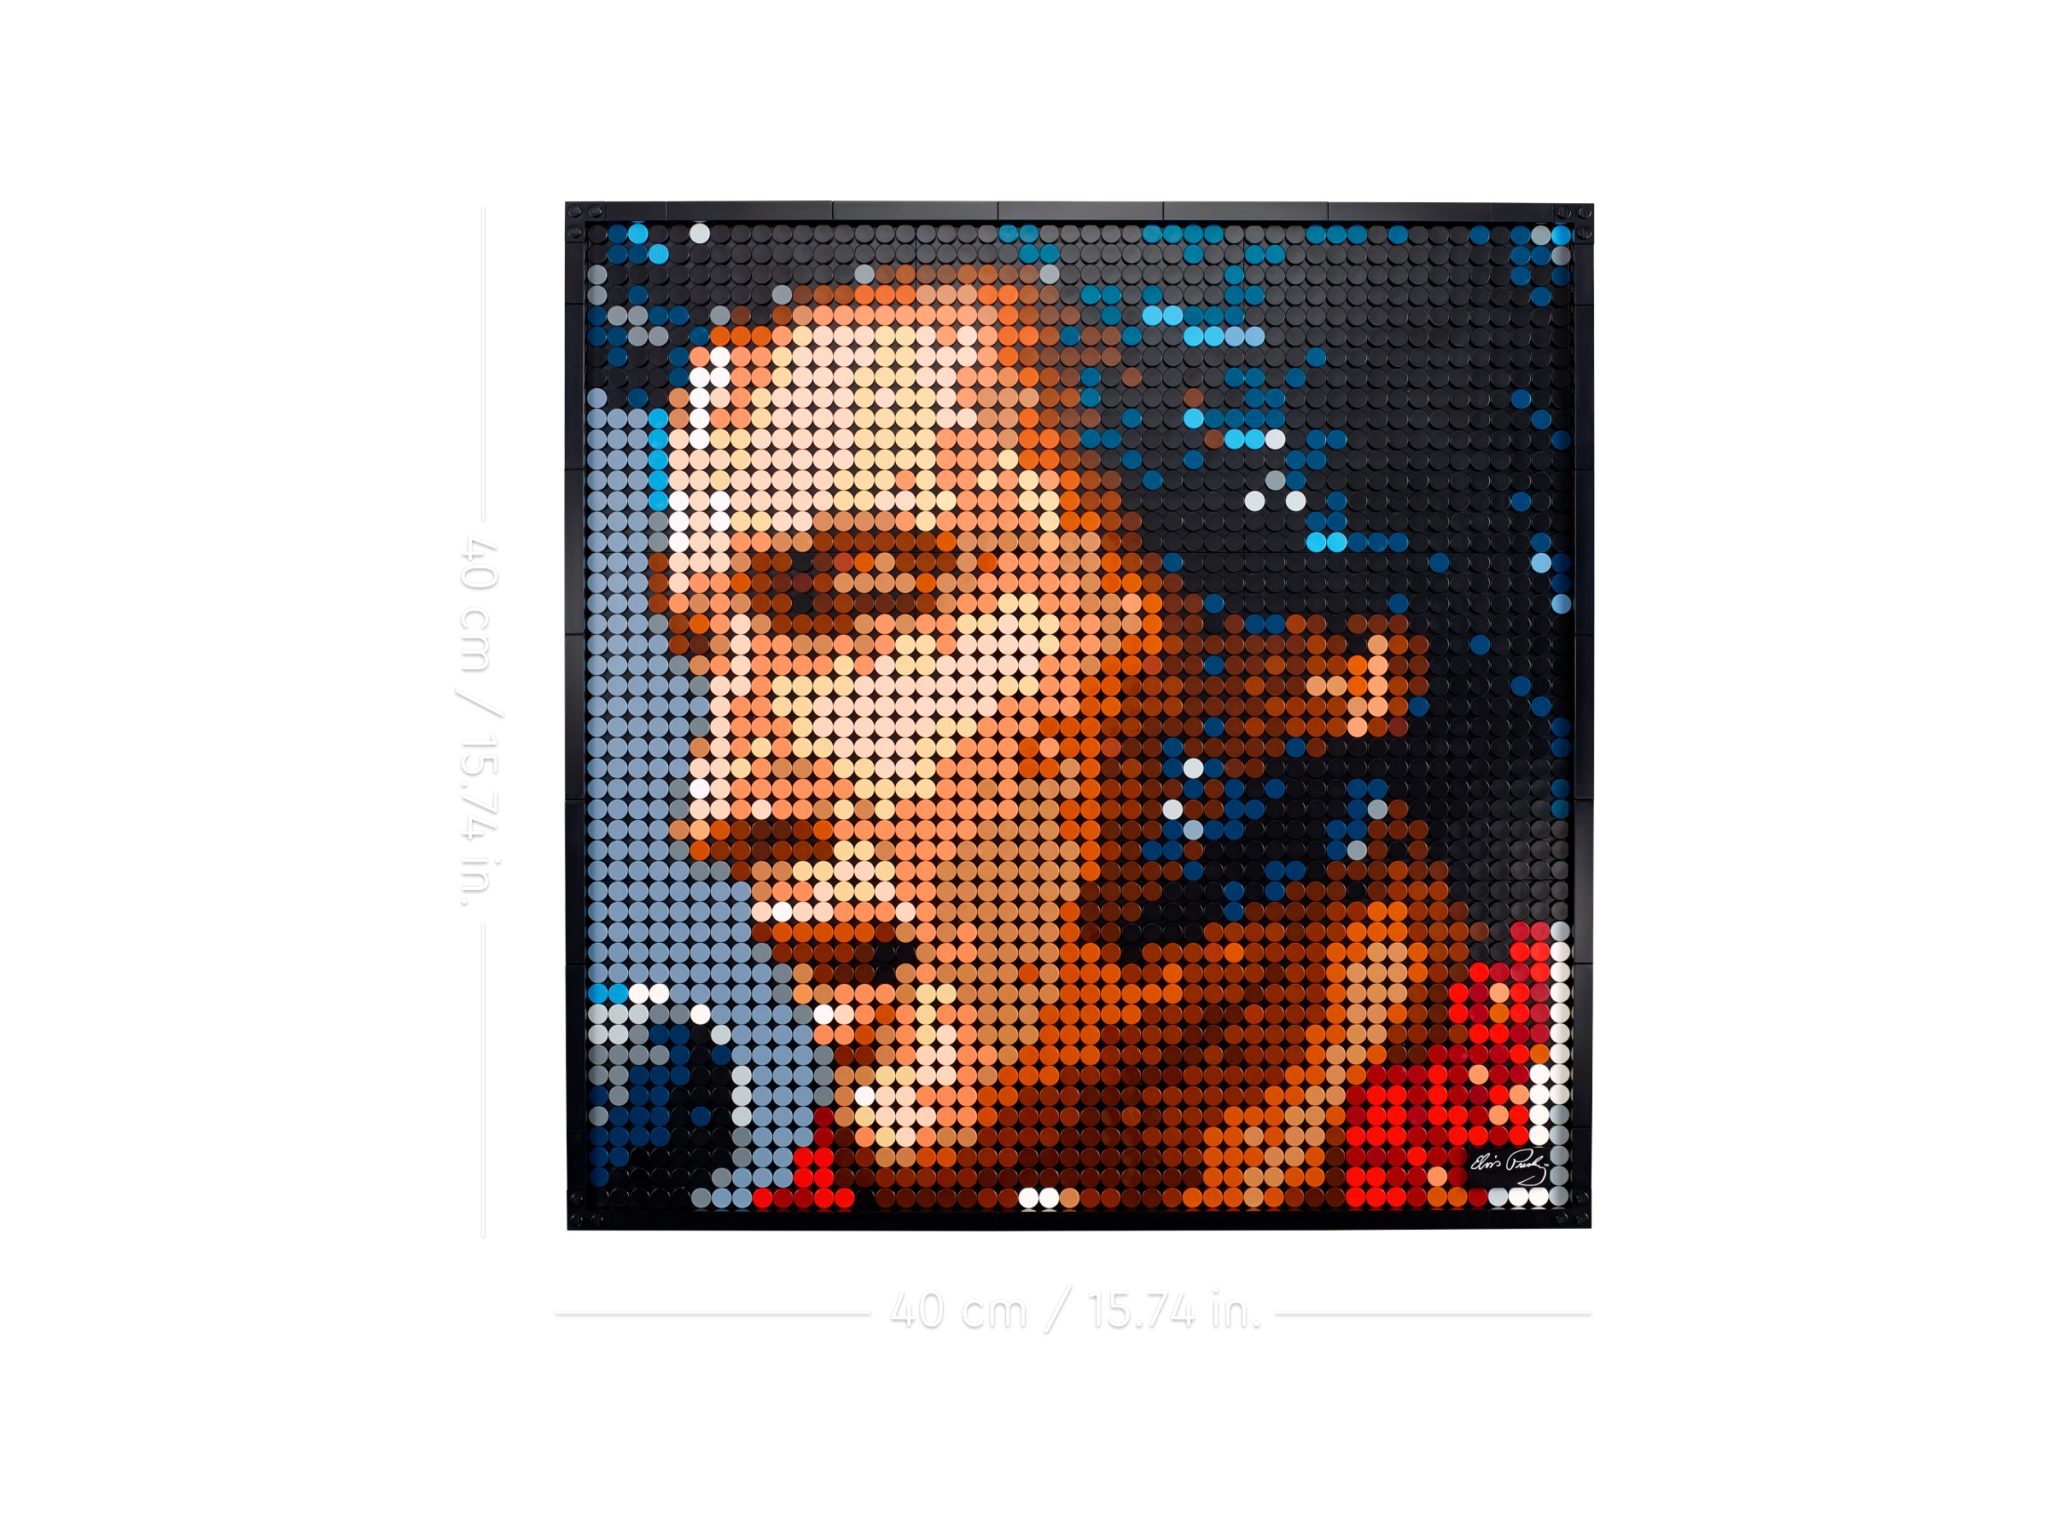 The King of Rock and Roll, Elvis Presley joins the LEGO Art theme ...